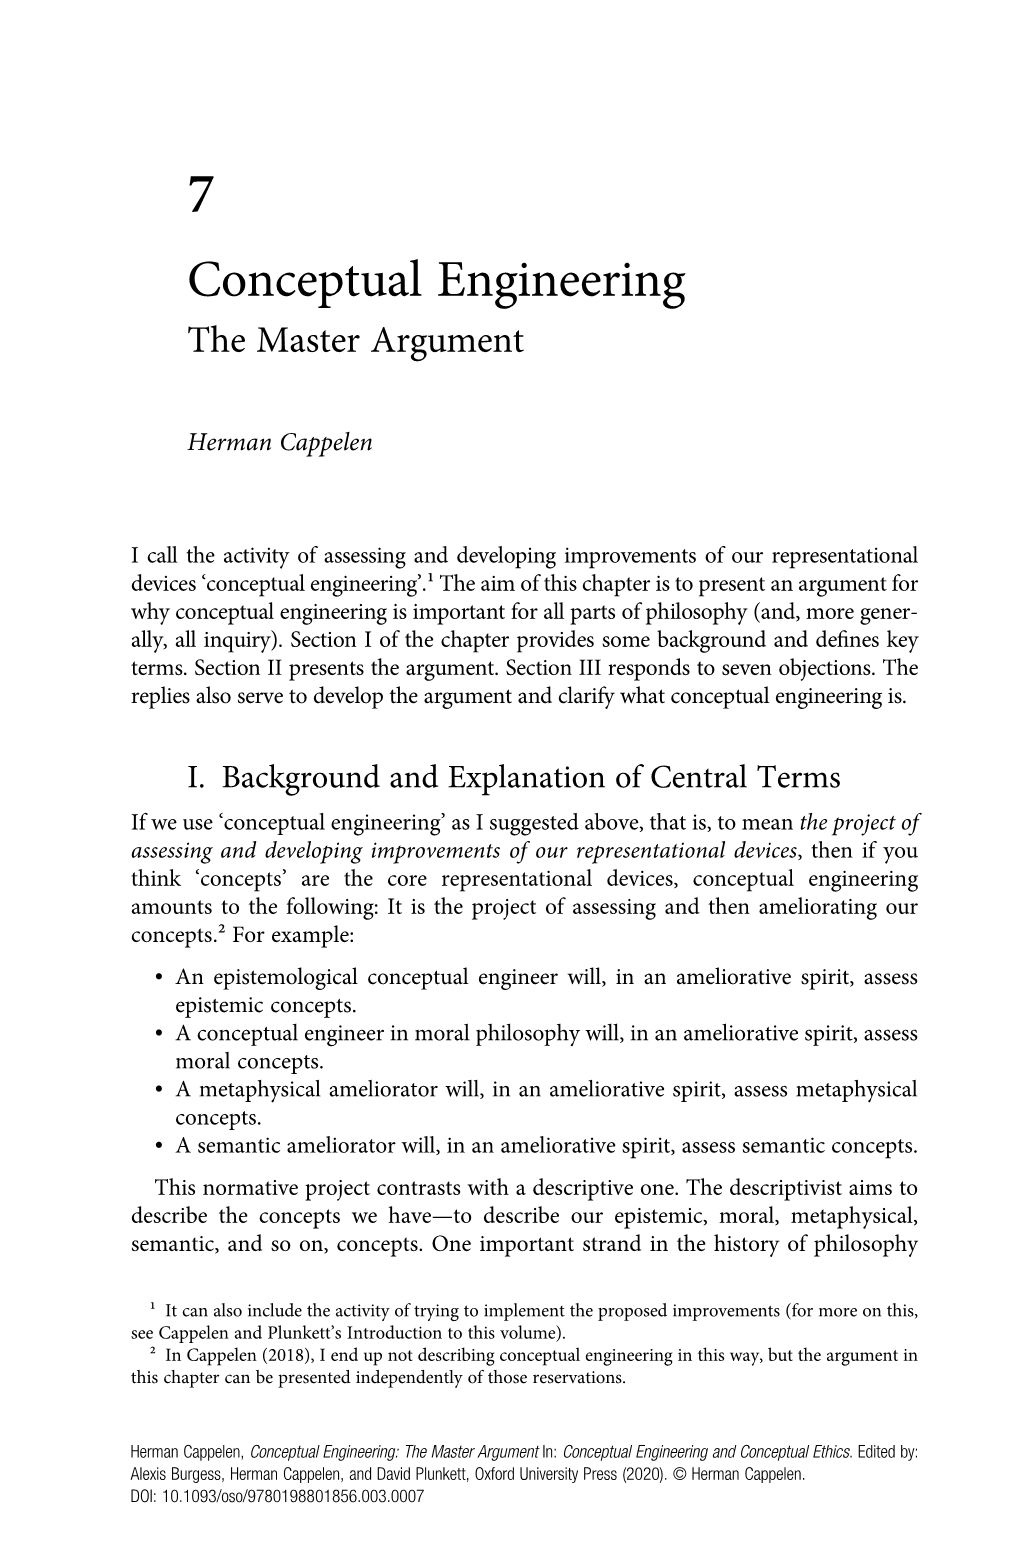 Conceptual Engineering the Master Argument